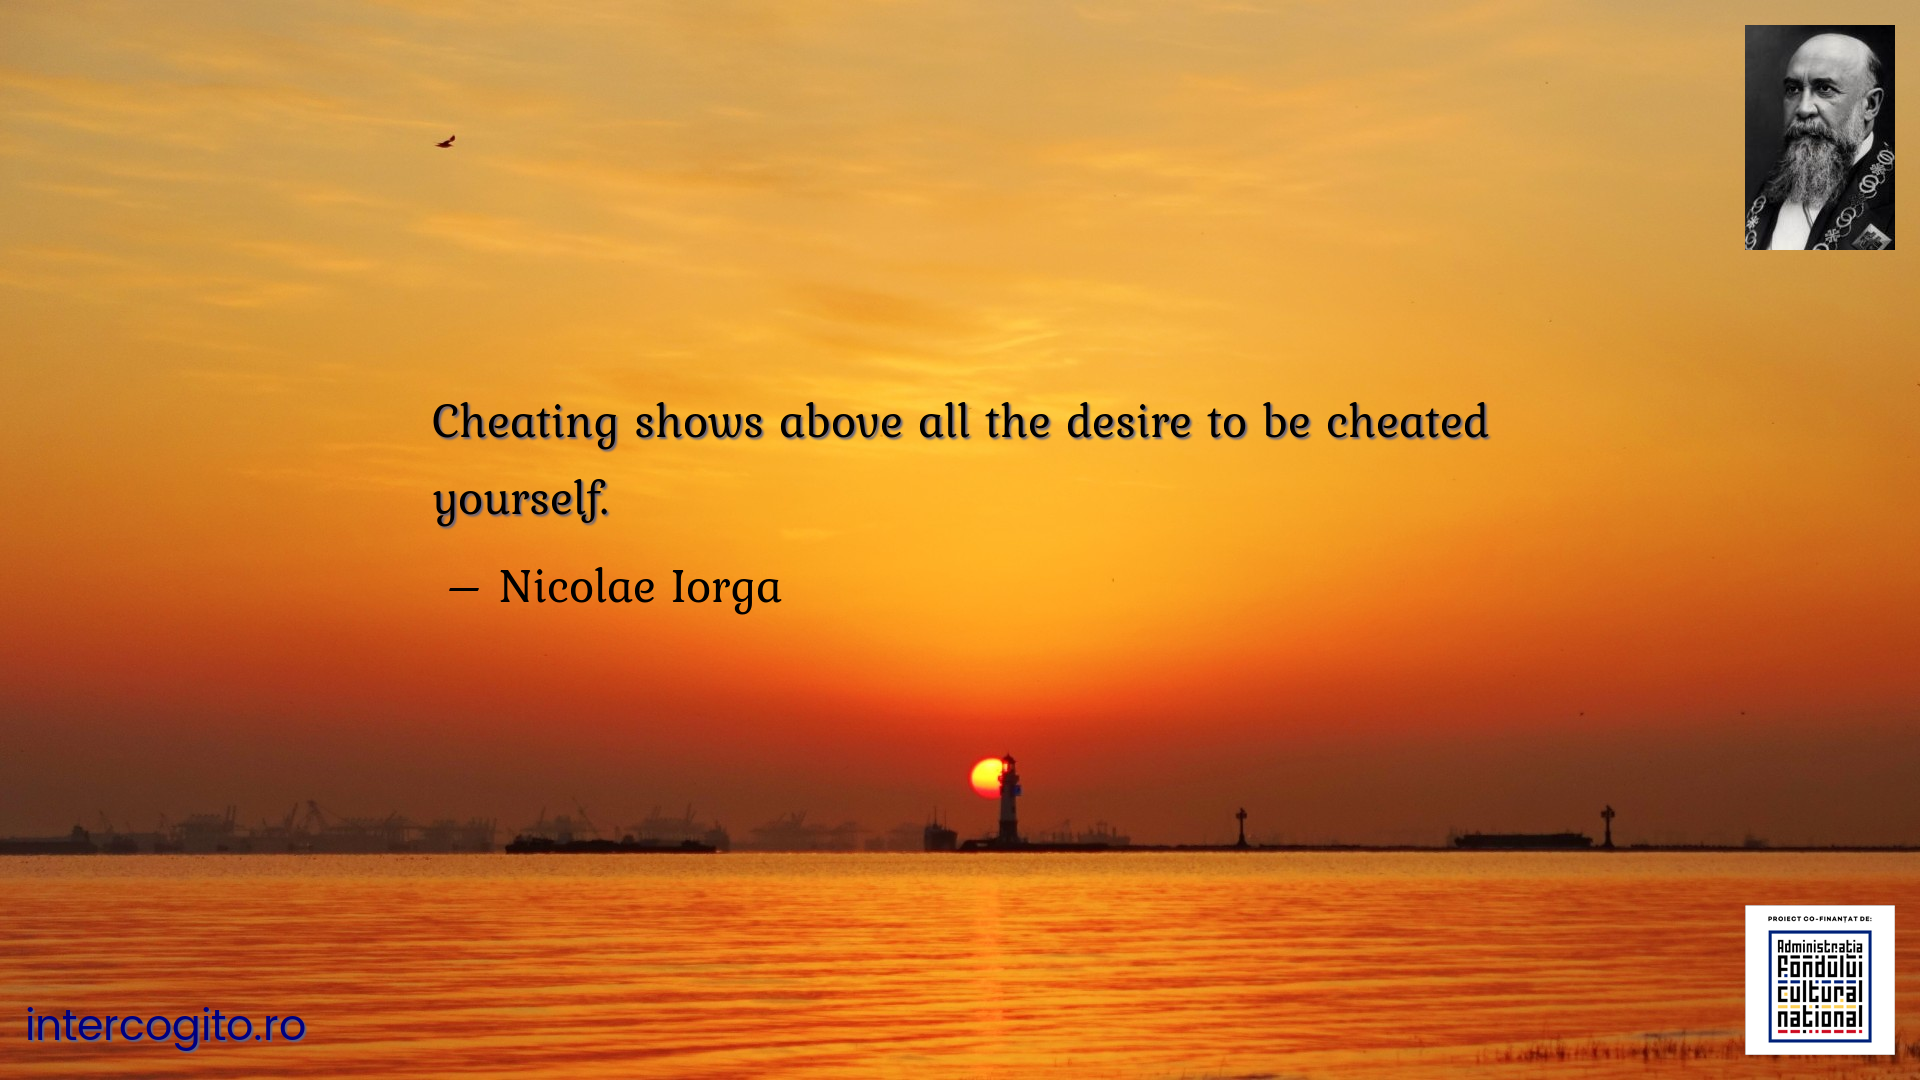 Cheating shows above all the desire to be cheated yourself.